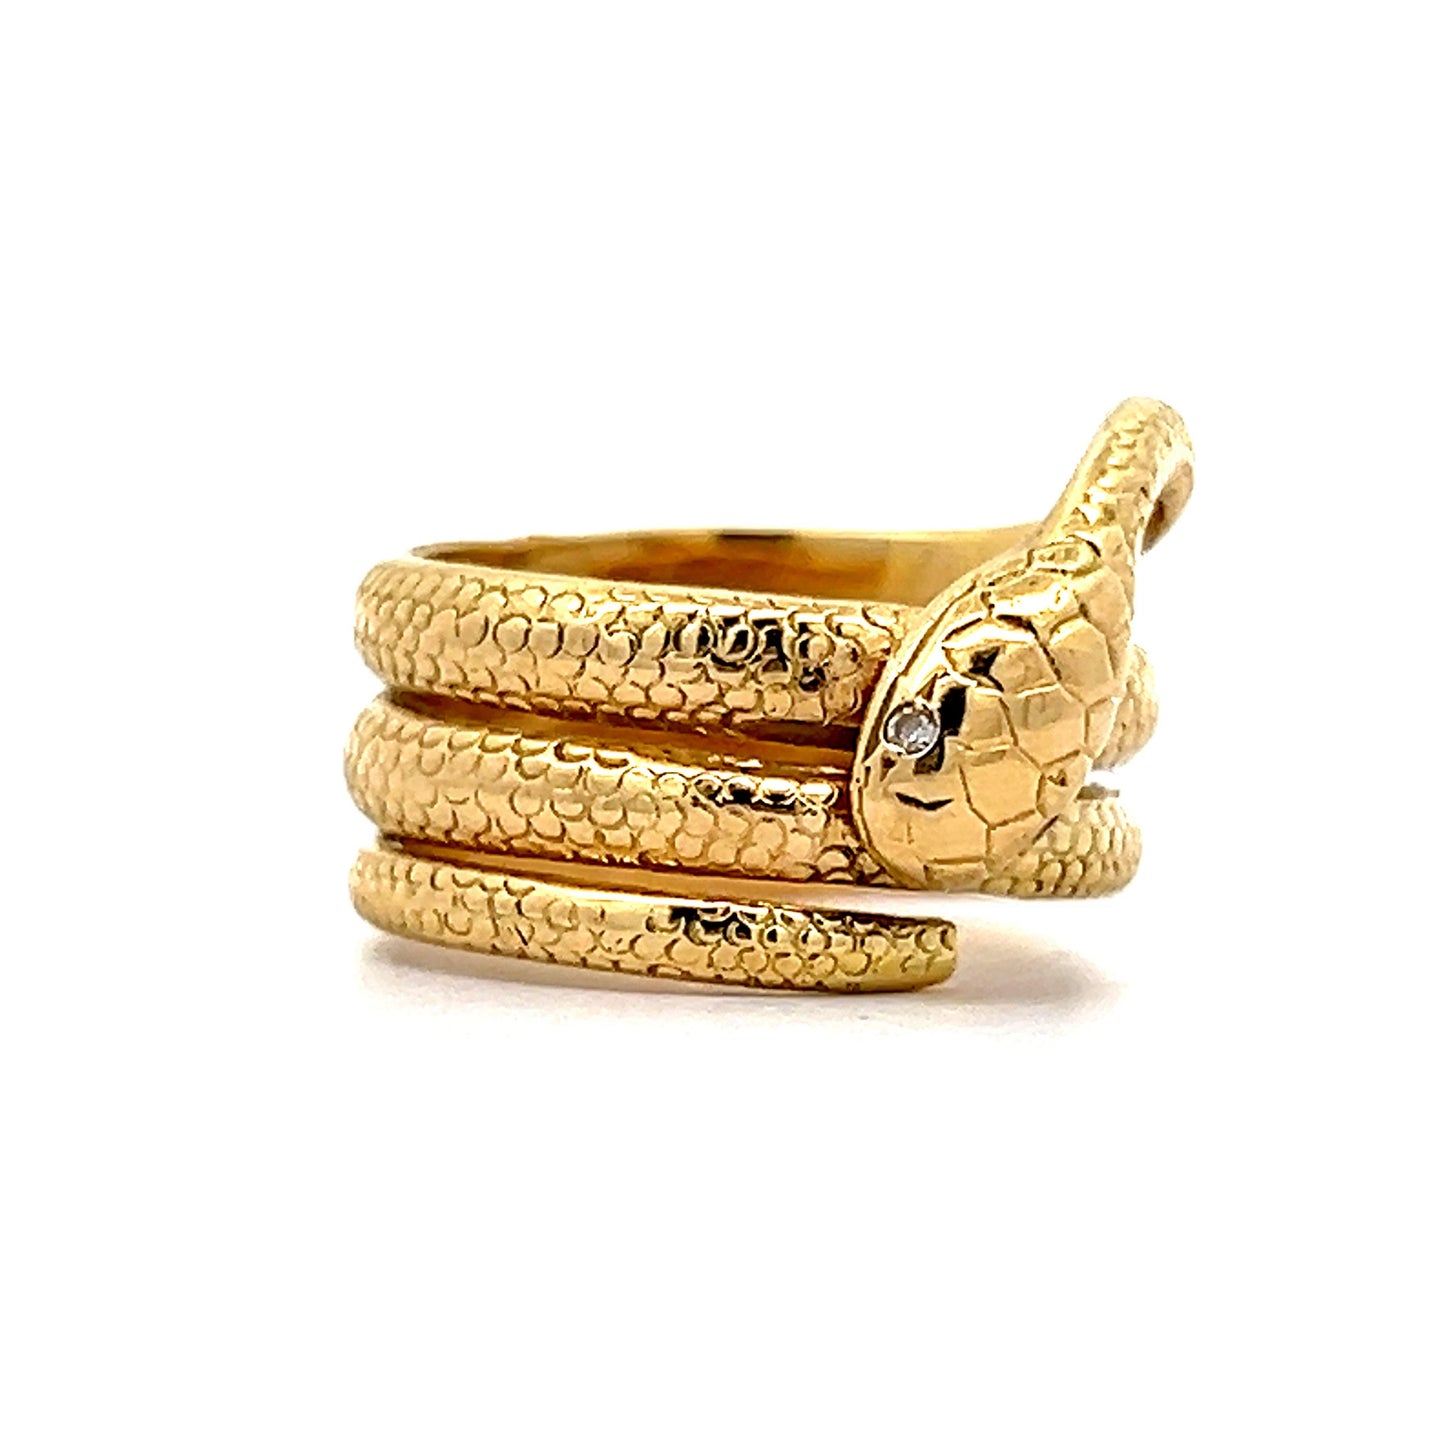 Snake Ring with Diamond Eyes in 18K Yellow Gold